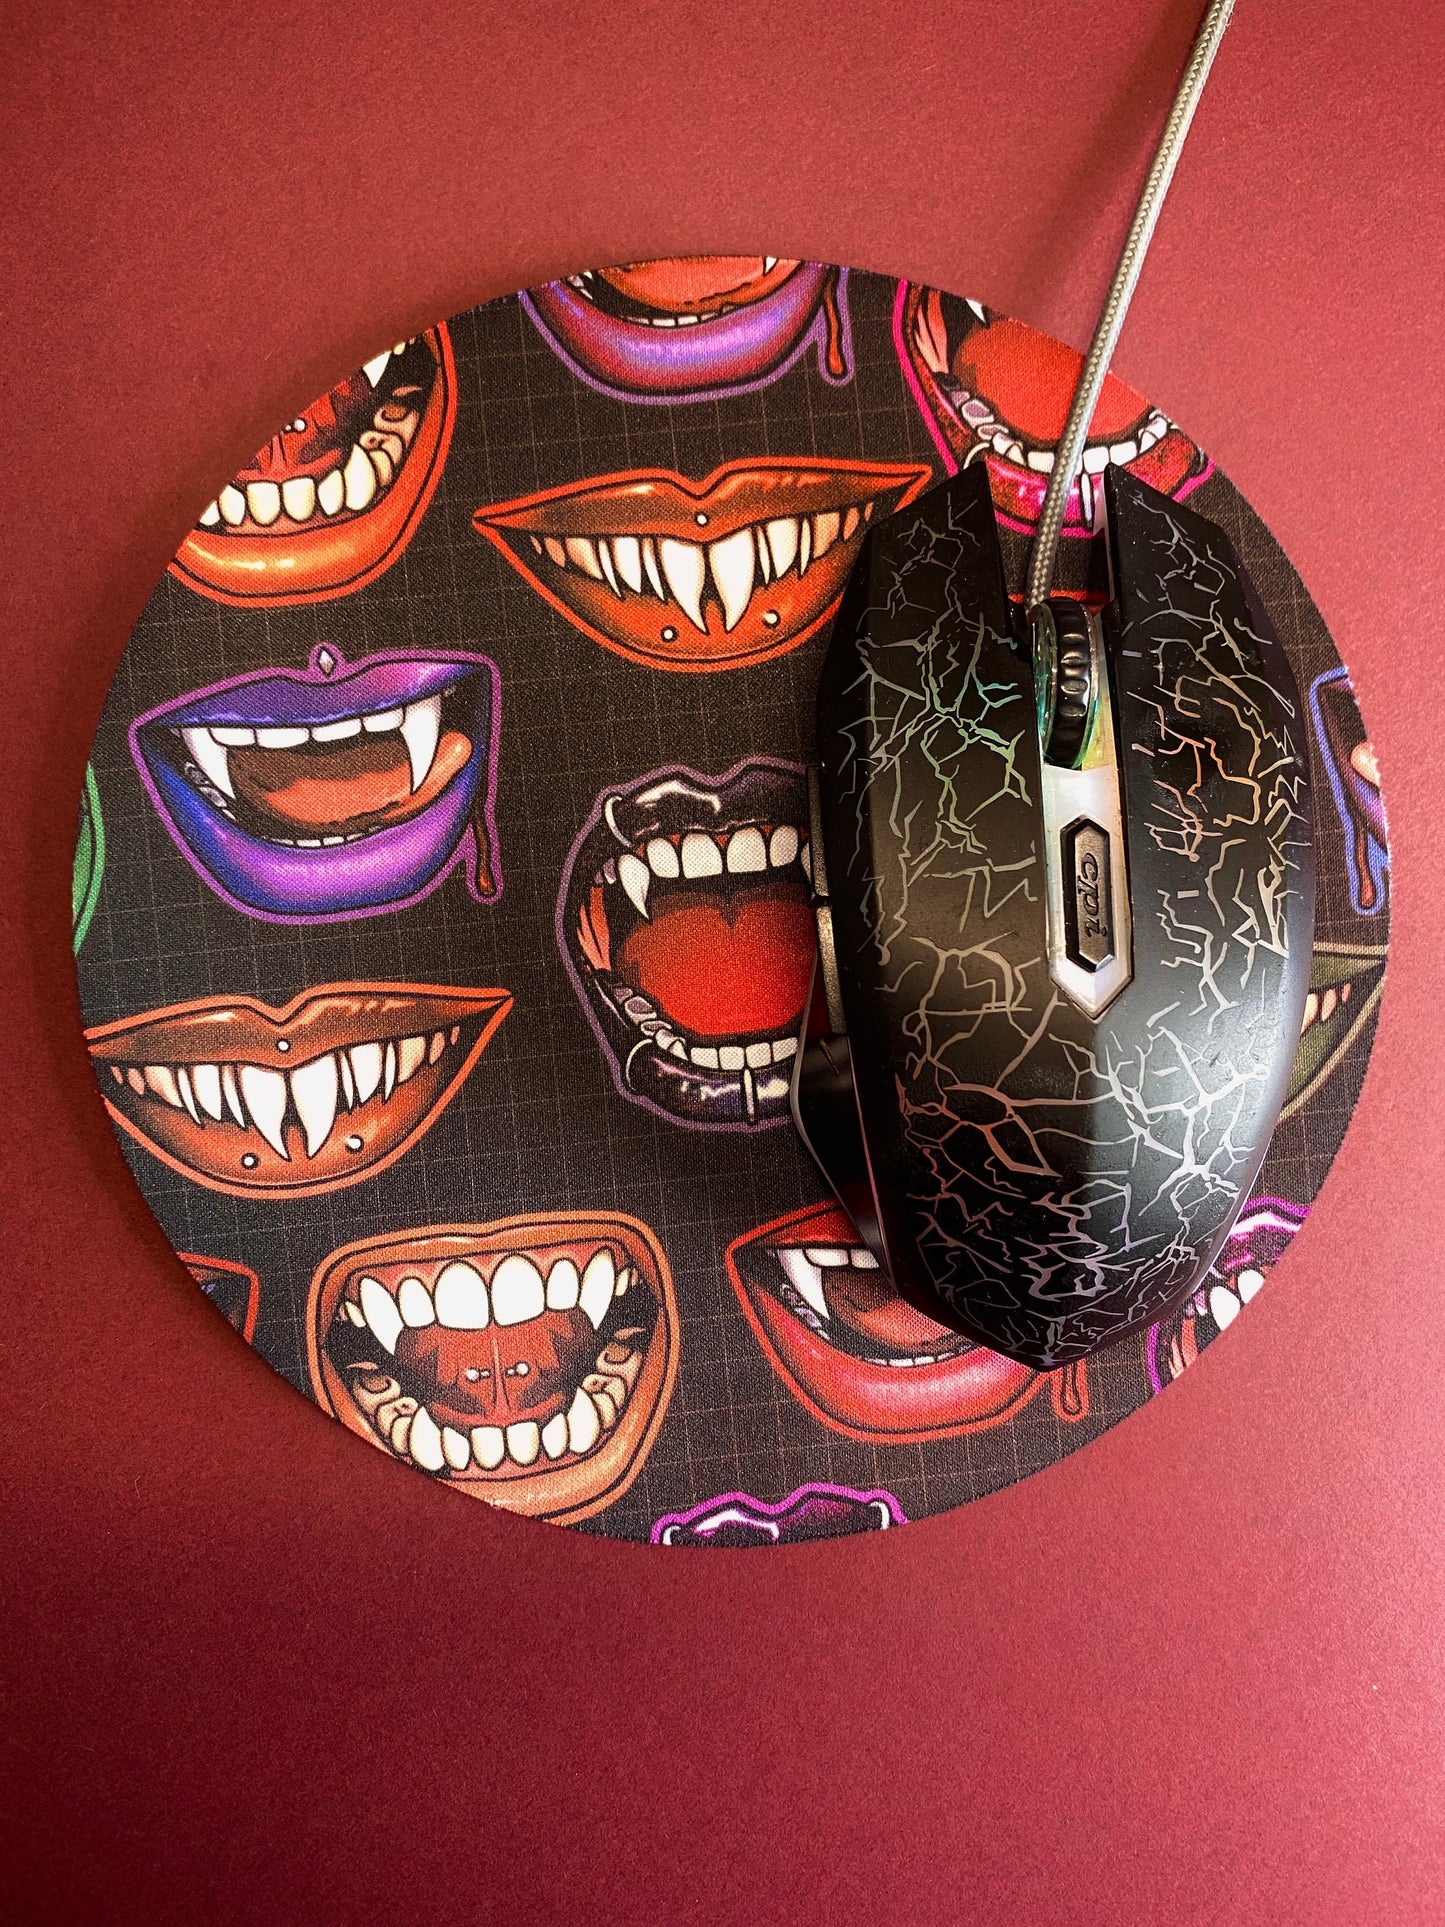 Fangs Mouse Pad - Round Mouse Mat | Desk Accessories | Work Home Computer Mousepad